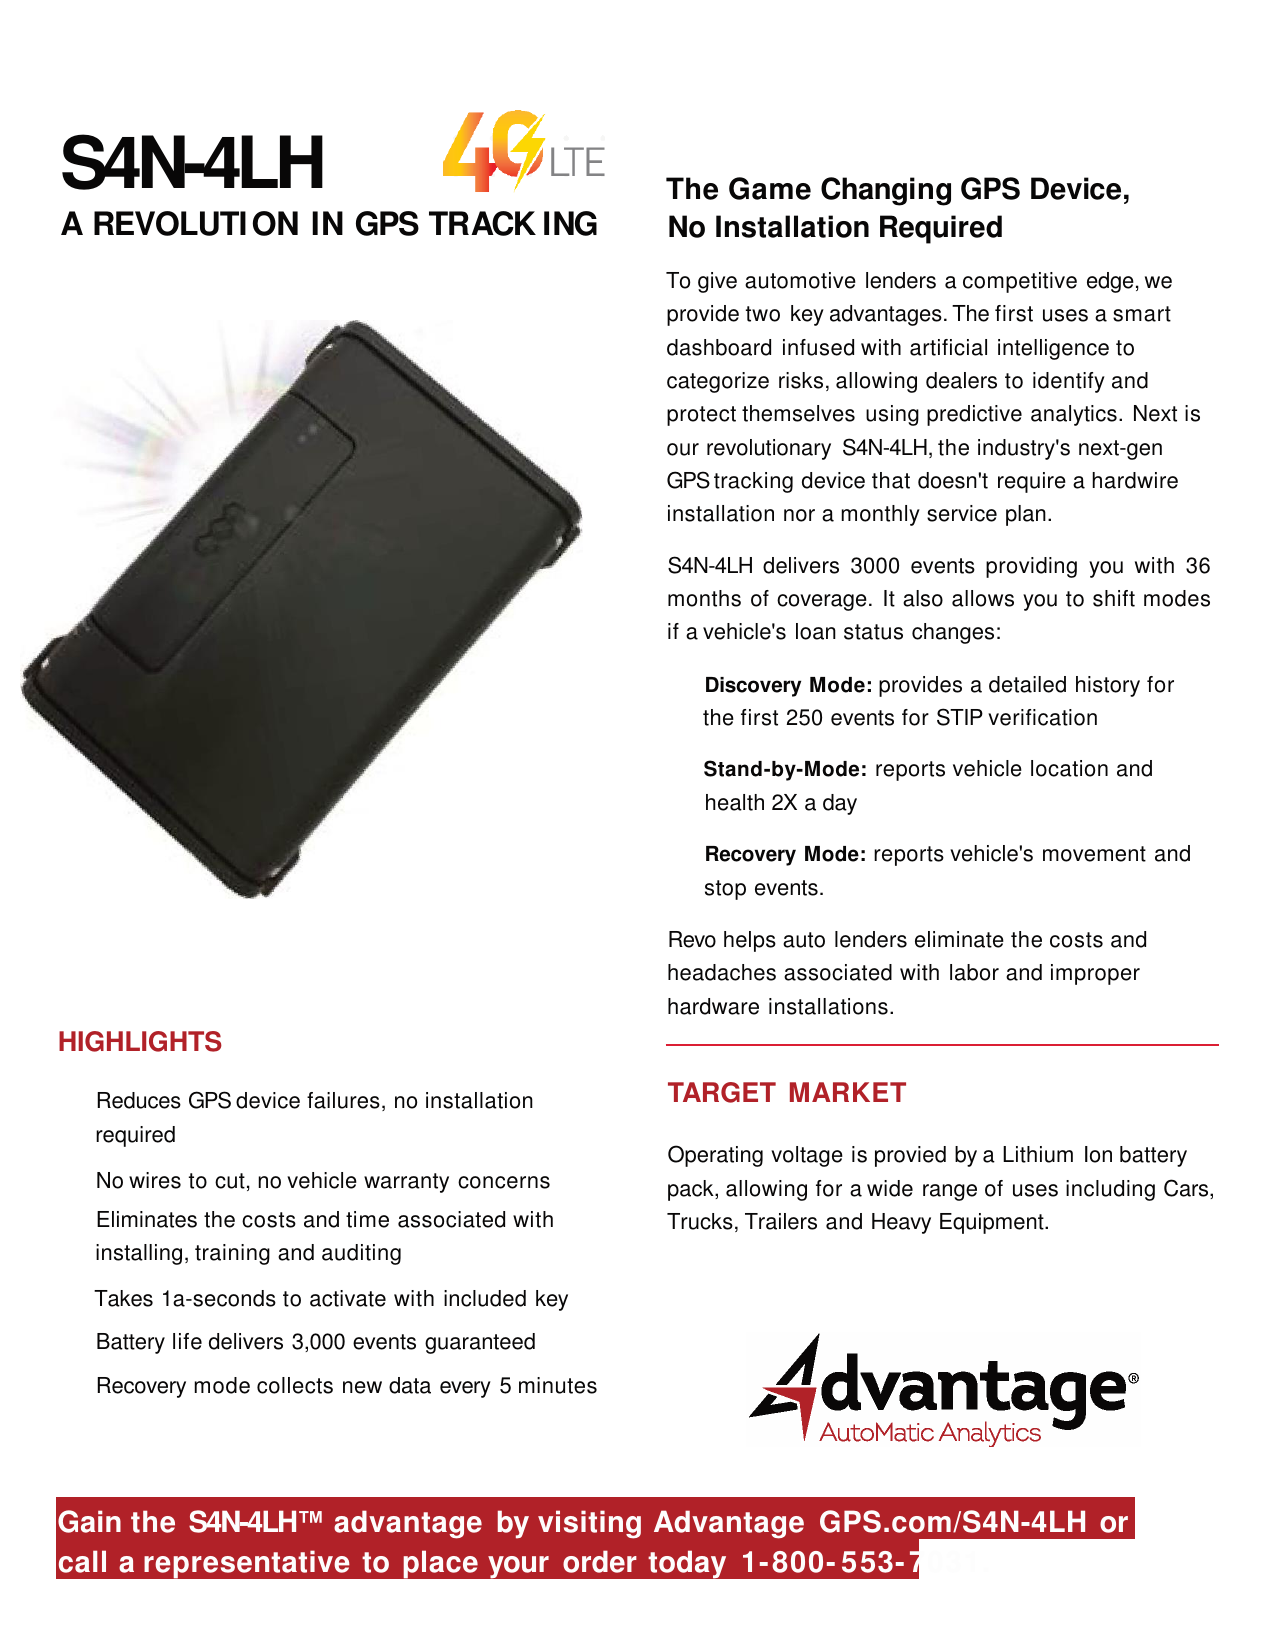 S4N-4LHA  REVOLUTION IN GPS TRACK ING The Game Changing GPS Device,No Installation RequiredTo give automotive lenders a competitive edge, weprovide two key advantages. The first uses a smartdashboard infused with artificial intelligence tocategorize risks, allowing dealers to identify andprotect themselves using predictive analytics. Next isour revolutionary S4N-4LH, the industry&apos;s next-gen GPStracking device that doesn&apos;t require a hardwireinstallation nor a monthly service plan.S4N-4LH delivers 3000 events providing you with 36months of coverage. It also allows you to shift modesif a vehicle&apos;s loan status changes:Discovery Mode: provides a detailed history forthe first 250 events for STIP verificationStand-by-Mode: reports vehicle location andhealth 2X adayRecovery Mode: reports vehicle&apos;s movement andstop events.Revo helps auto lenders eliminate the costs and headaches associated with labor and improperhardware installations.HIGHLIGHTSReduces GPS device failures, no installationrequiredNo wires to cut, no vehicle warranty concernsEliminates the costs and time associated withinstalling, training and auditingTakes 1a-seconds to activate with included keyBattery life delivers 3,000 events guaranteedRecovery mode collects new data every 5 minutesTARGET MARKETOperating voltage is provied by a Lithium Ion batterypack, allowing for a wide range of uses including Cars,Trucks, Trailers and Heavy Equipment.Gain the S4N-4LH™advantage by visiting Advantage GPS.com/S4N-4LH orcall a representative to place your order today 1-800- 553-7031.